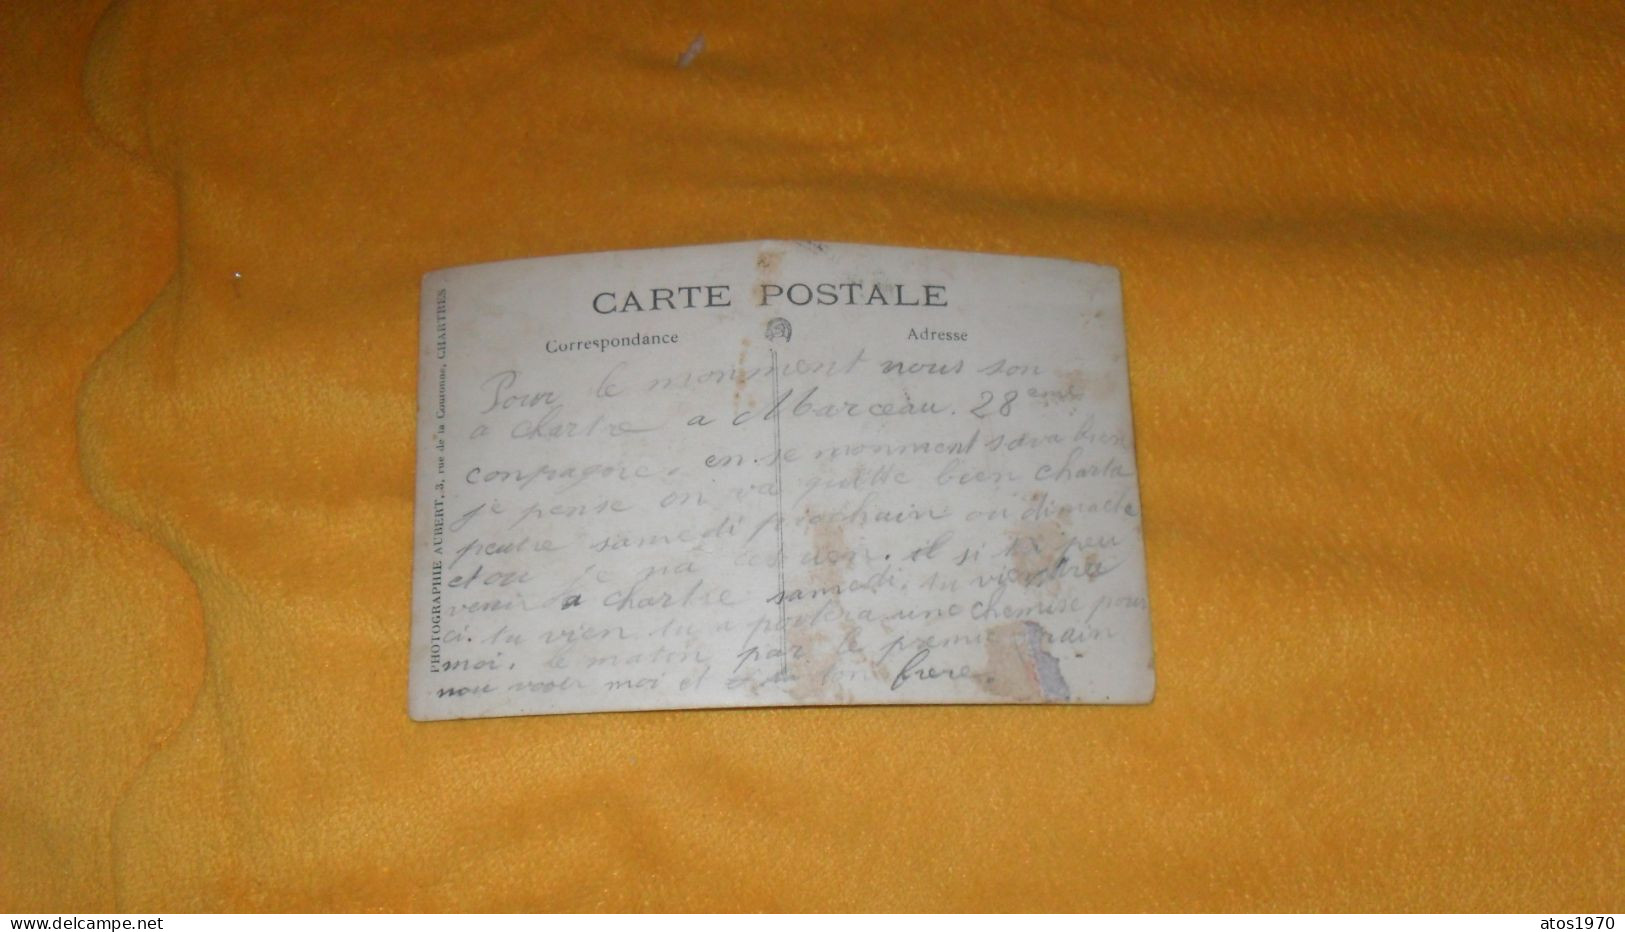 CARTE POSTALE PHOTO ANCIENNE CIRCULEE DATE ?../ SCENE PHOTO EMPLOYES ?..A. MILAN CHARBONS COKES 5 GRAND FAUBOURG..CHARET - Mercanti